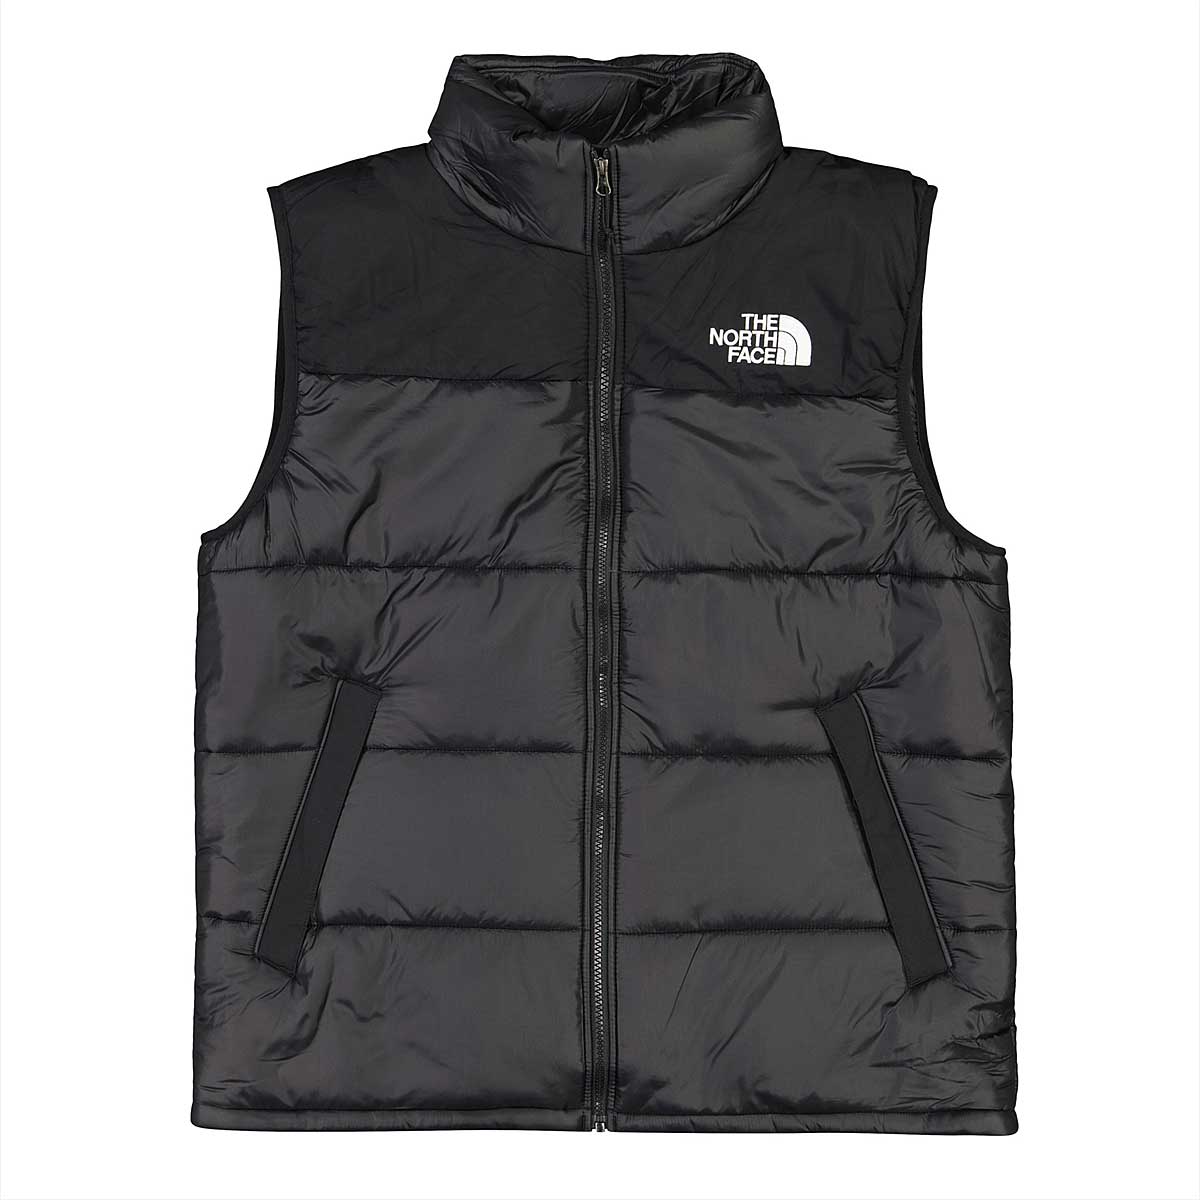 The North Face Himalayan Insulated Vest, Tnf Black